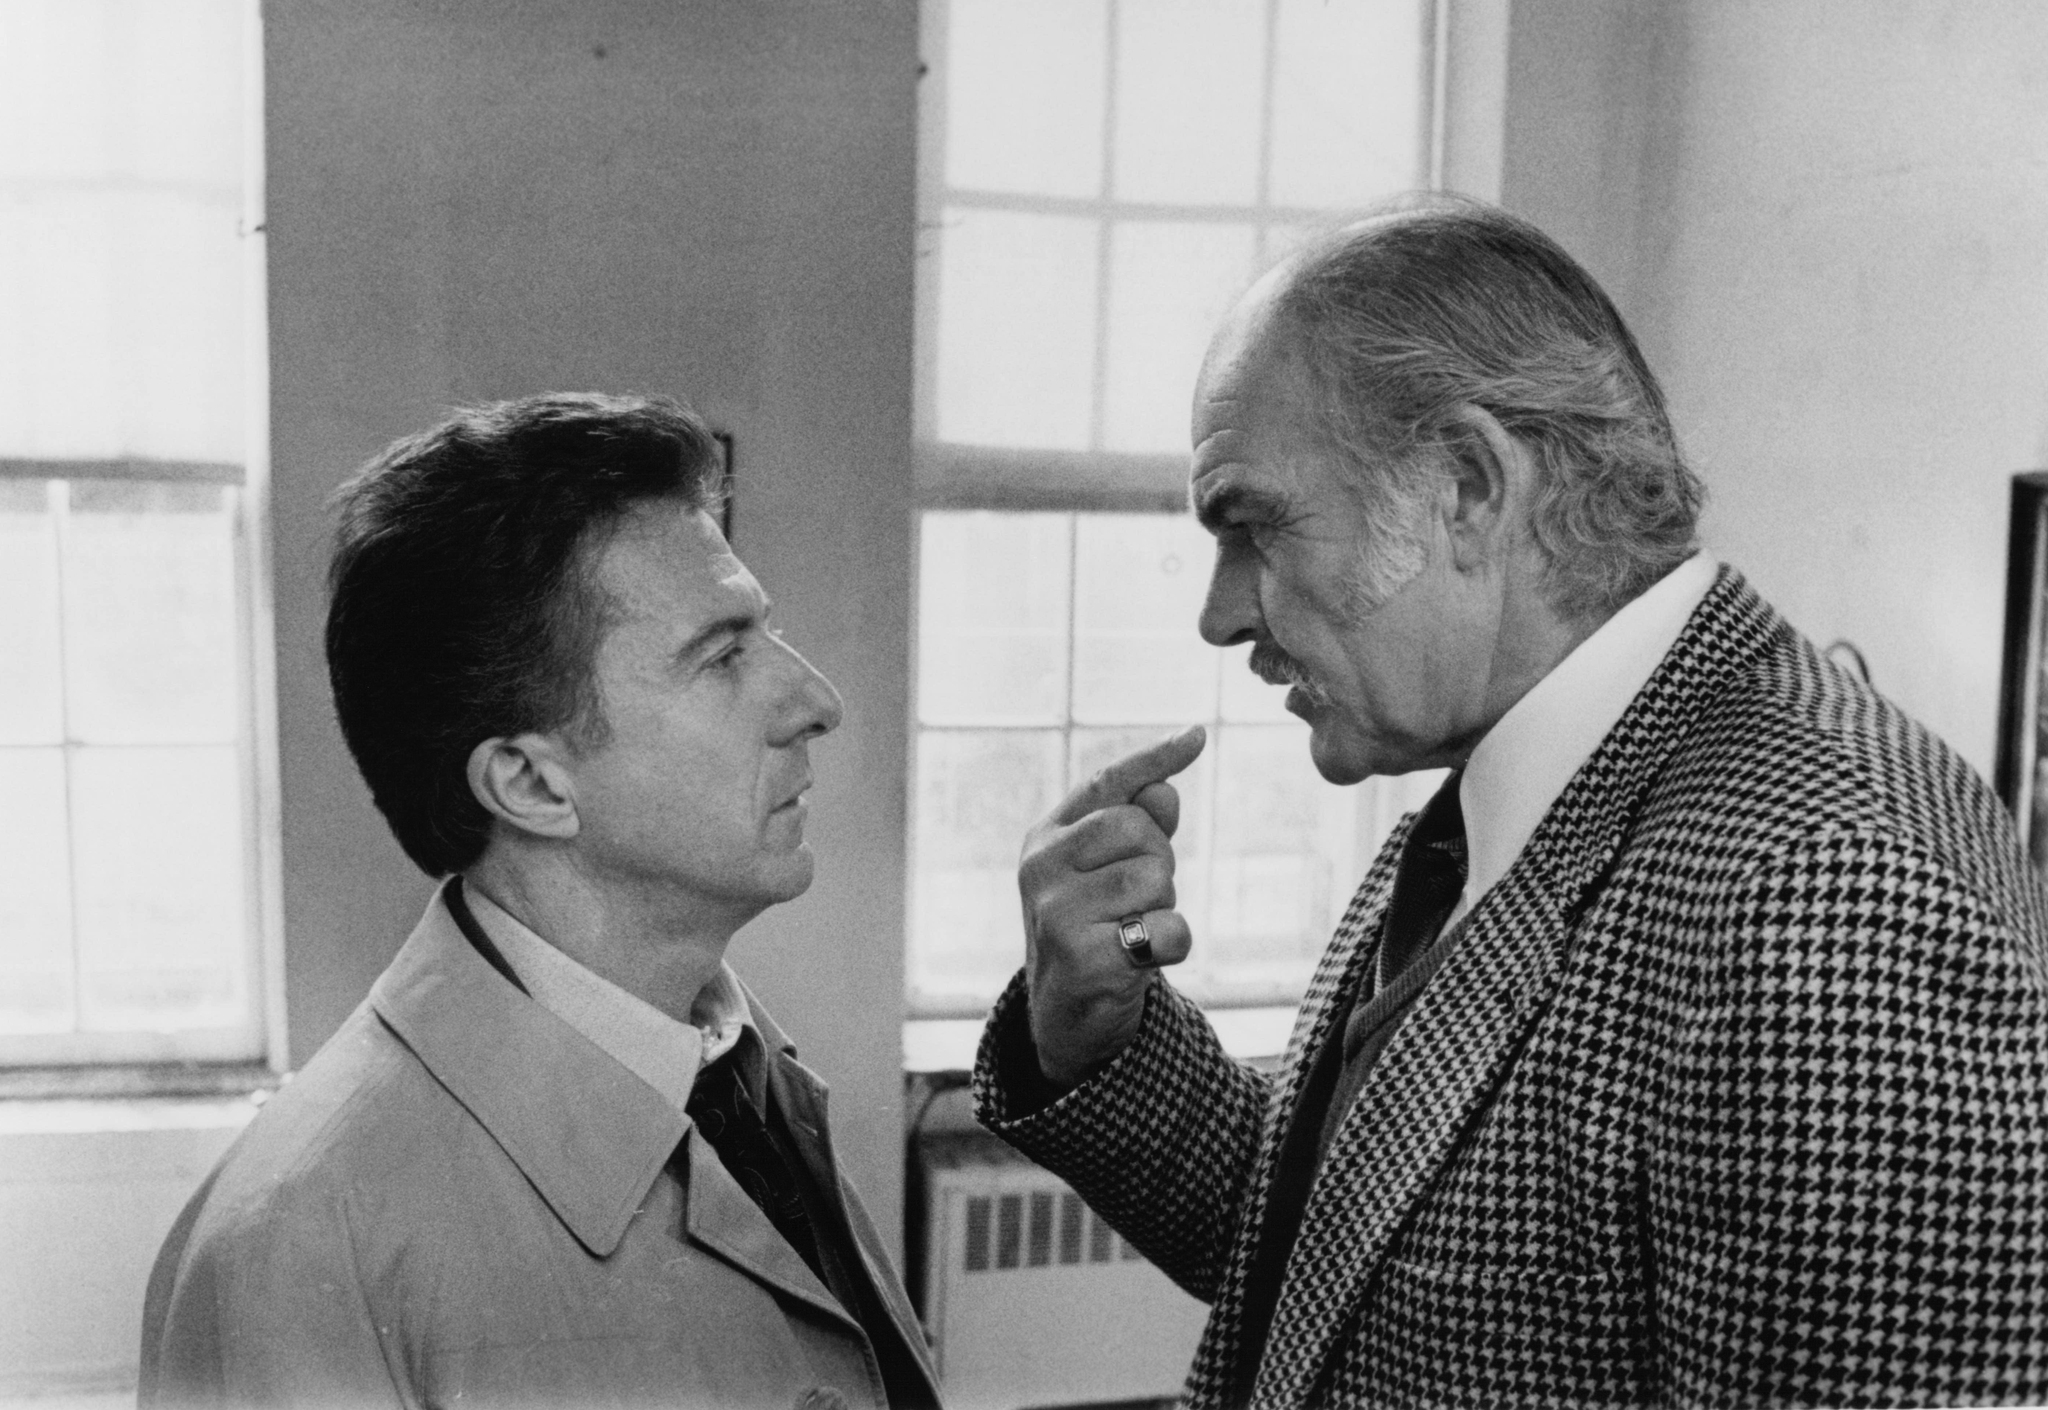 Still of Sean Connery and Dustin Hoffman in Family Business (1989)